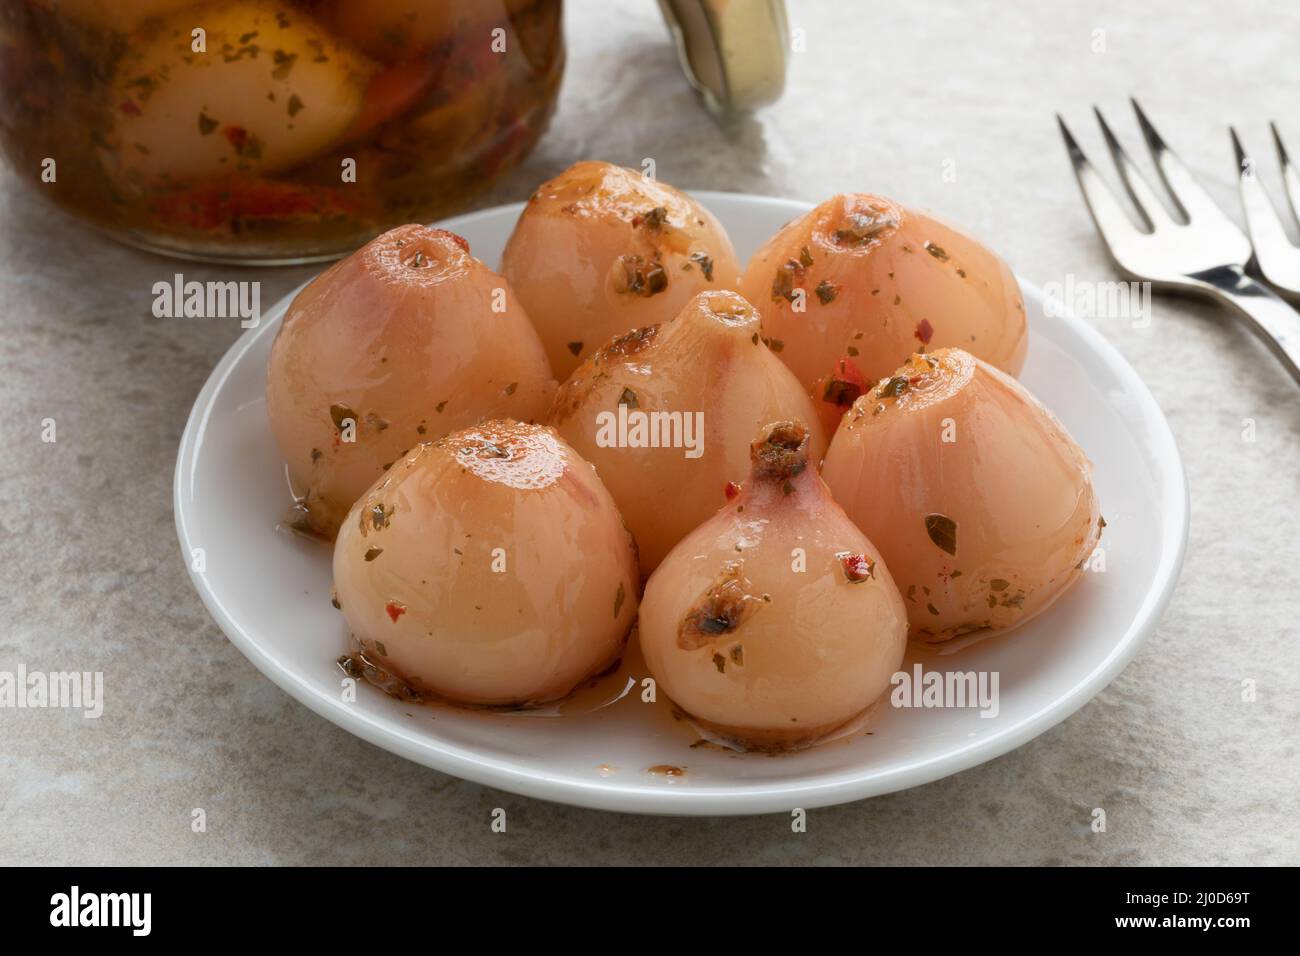 Preserved Lampascioni, Tassel grape, on a plate  close up as snack Stock Photo